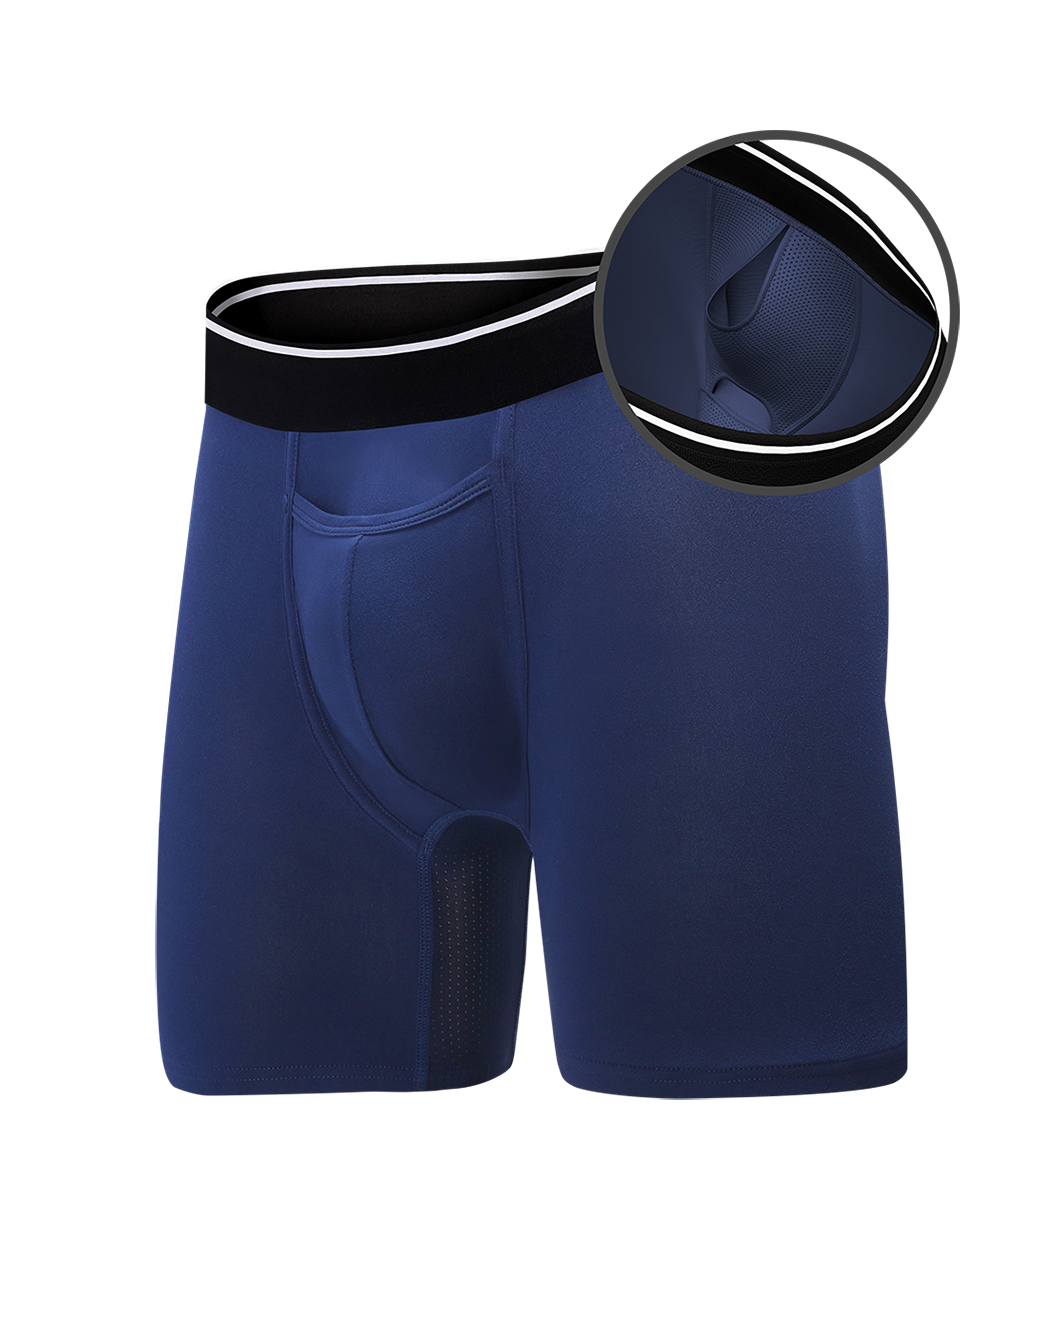 Classic Performance Boxer Brief Underwear - All Citizens Athletic Fit